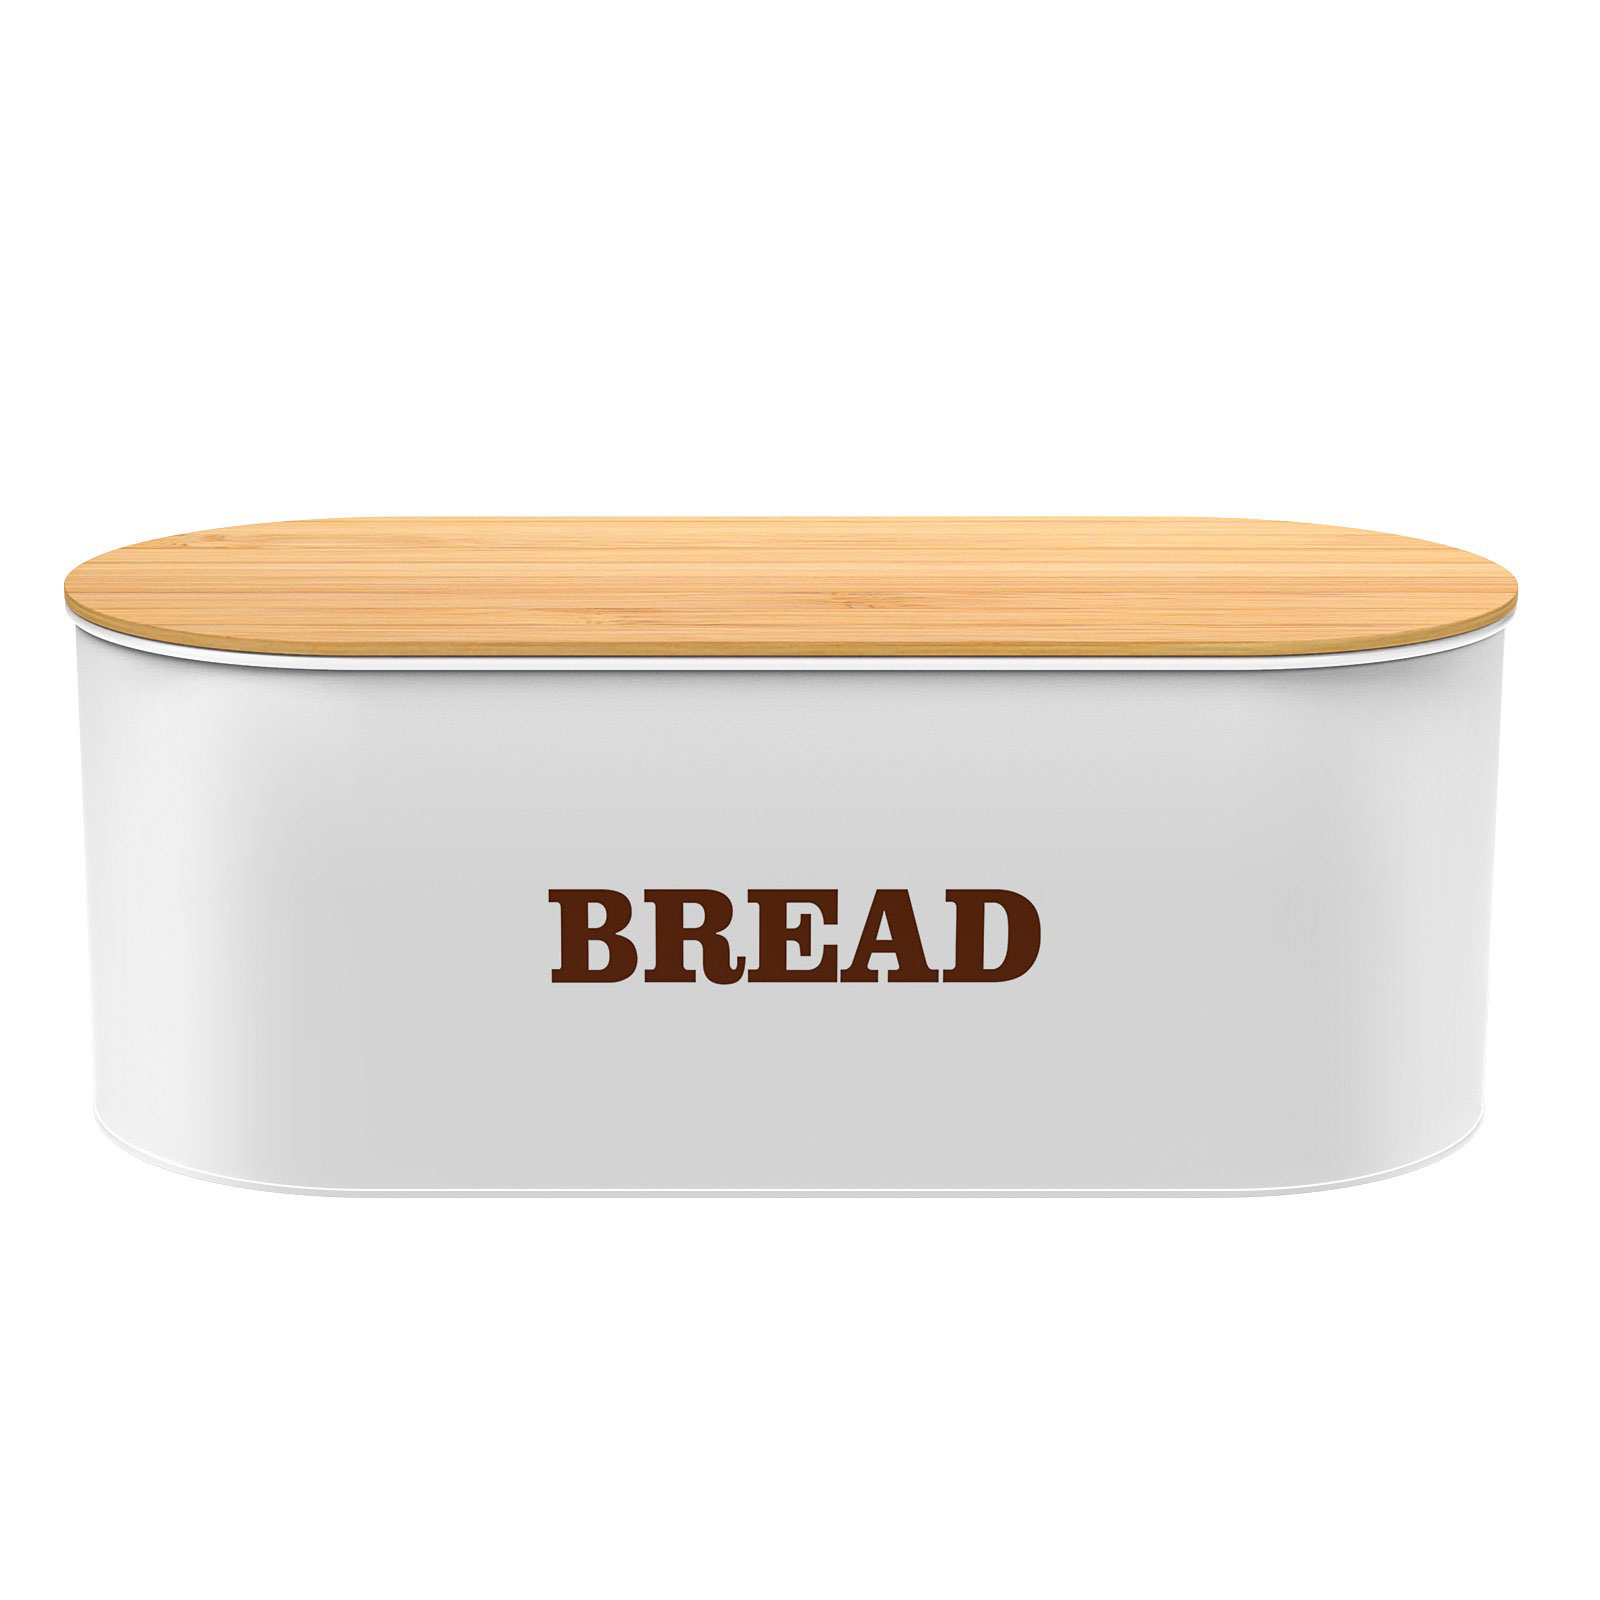 White Bread Storage Box Metal Storage Container Bread Box with Bamboo Lid for Home Kitchen